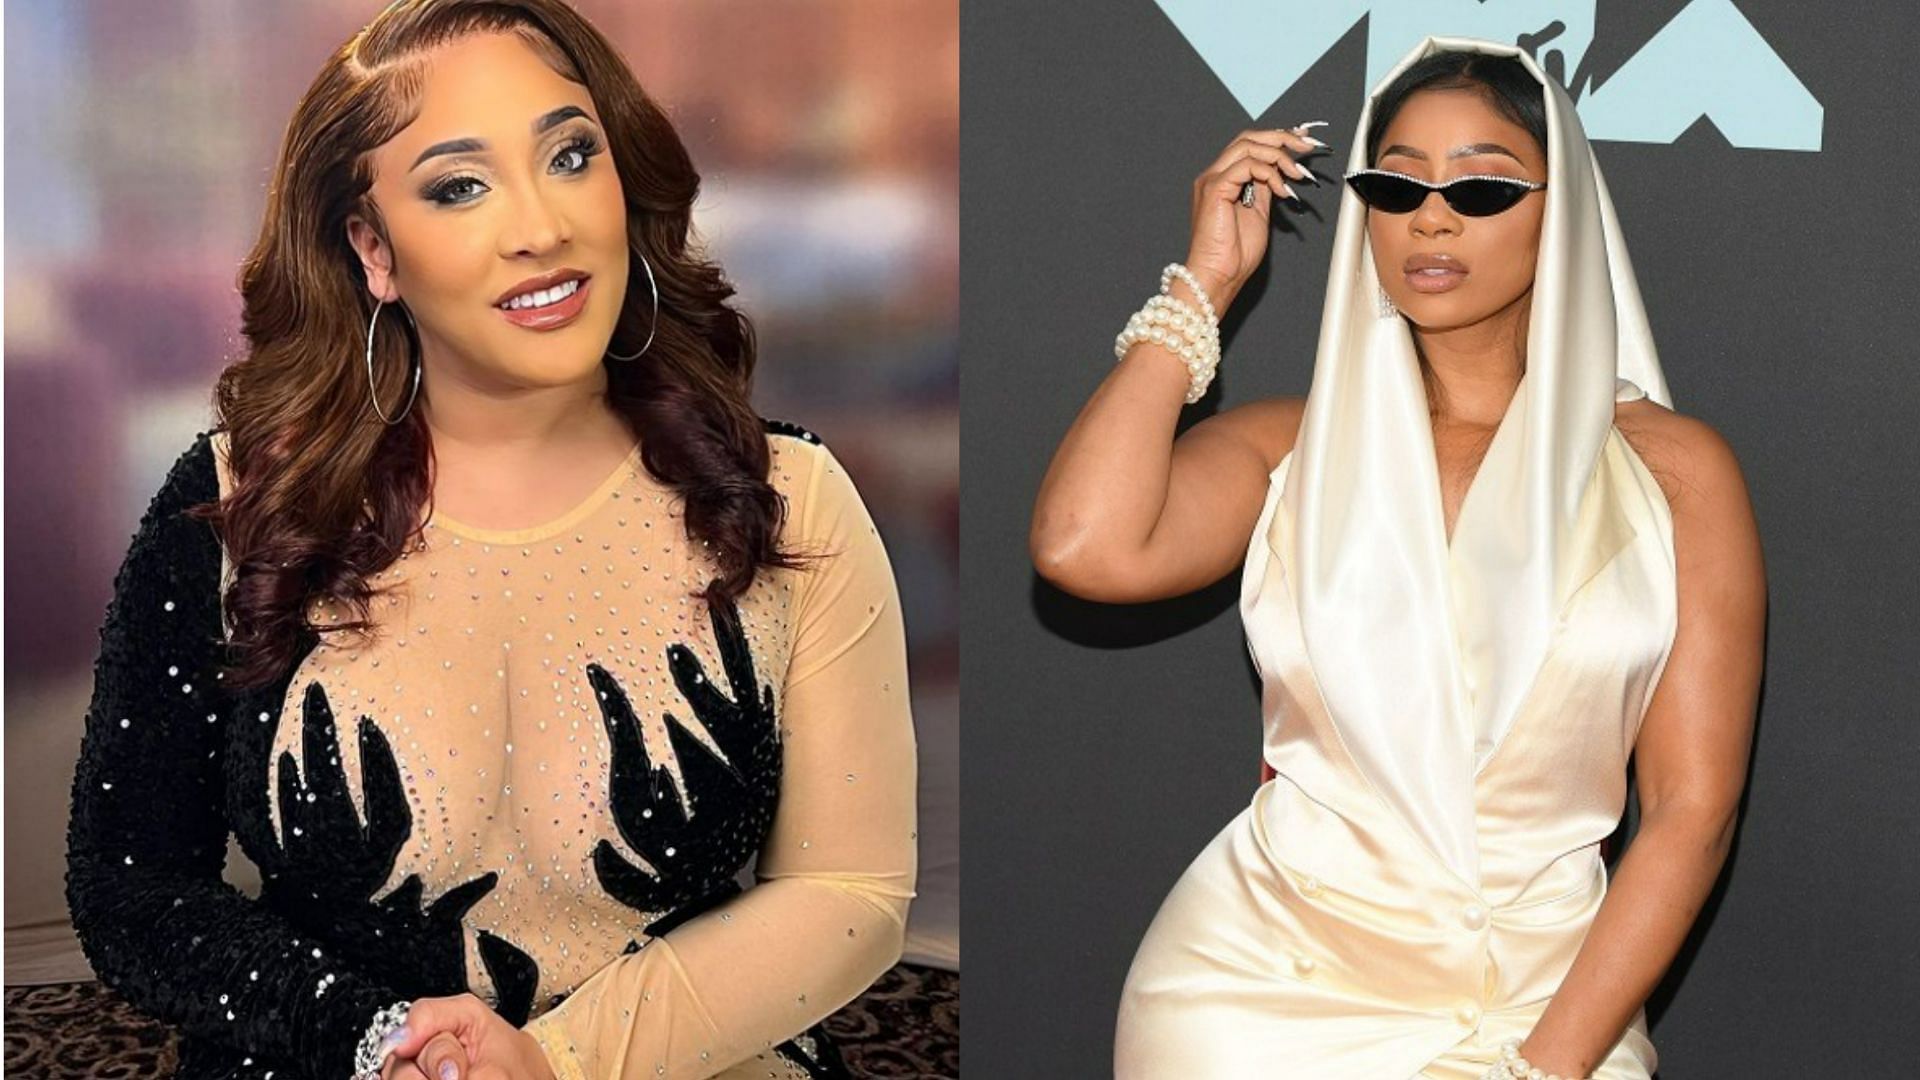 Tommie Lee and Natalie Nunn get into altercation prior to Zeus network fight (Image via realmissnatalienunn/Instagram and Getty Images)